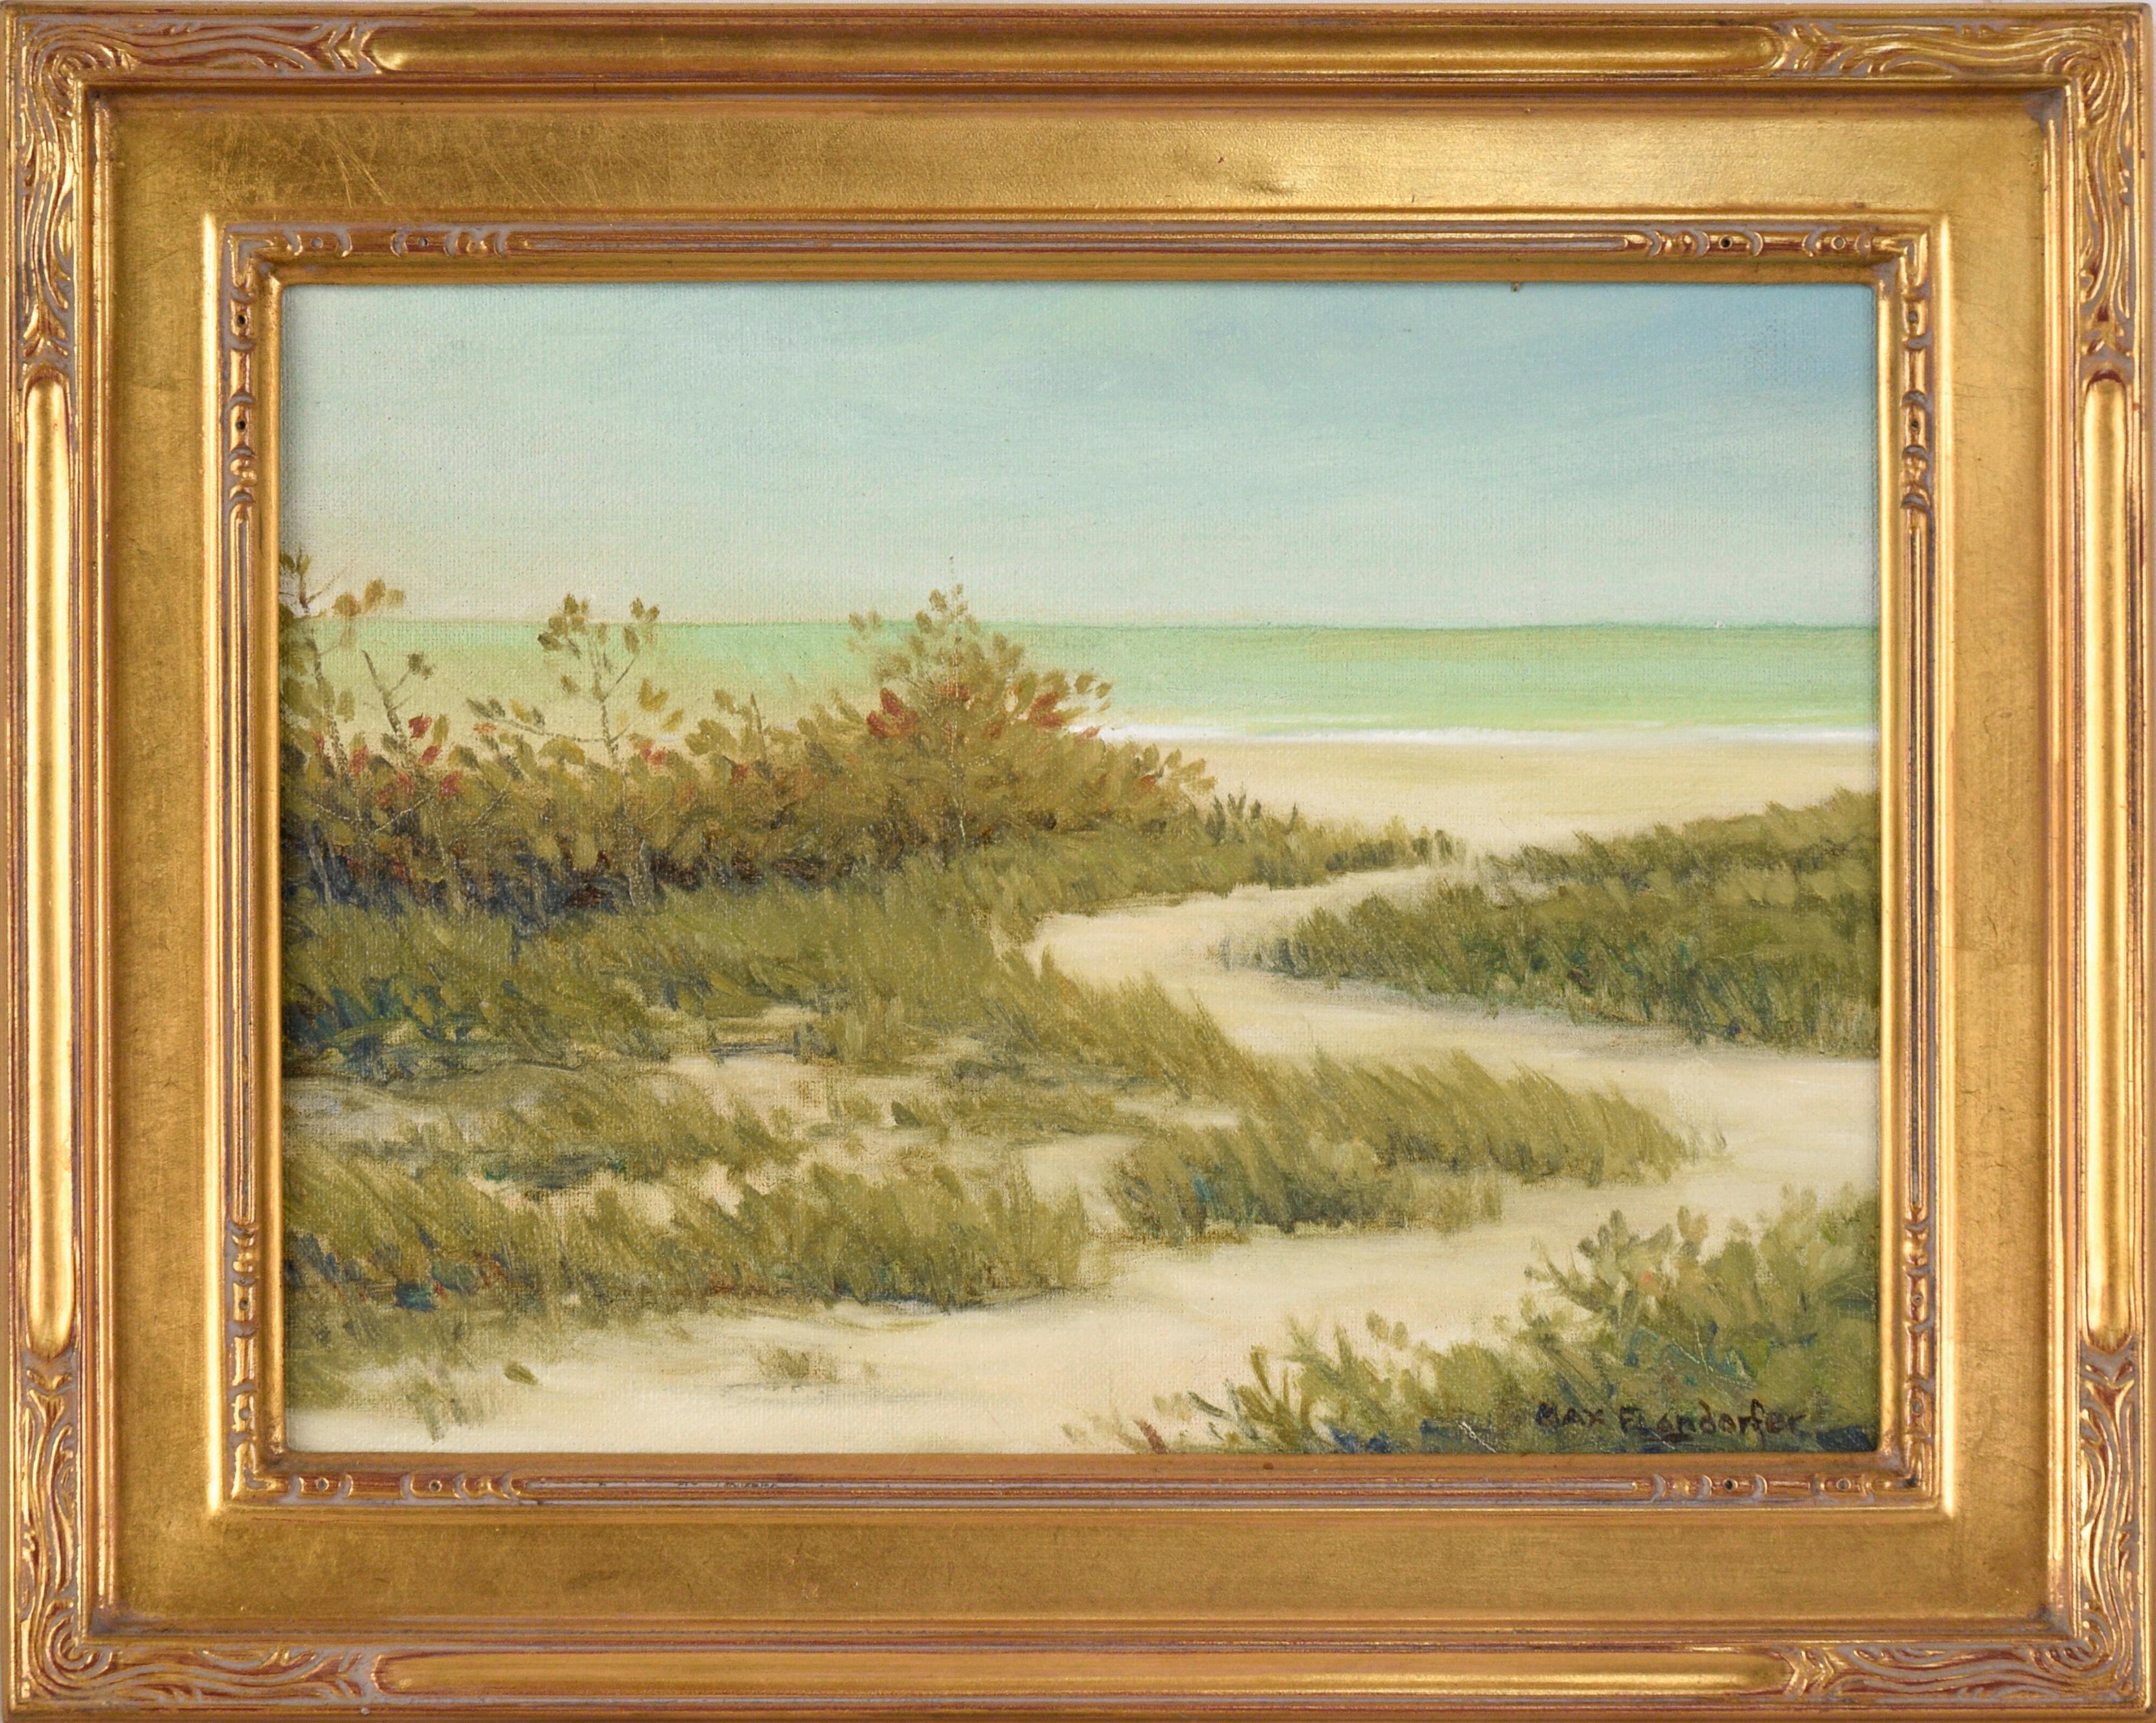 Max Flandorfer Landscape Painting - "Southern Beach" Coastal Landscape in Oil on Canvas